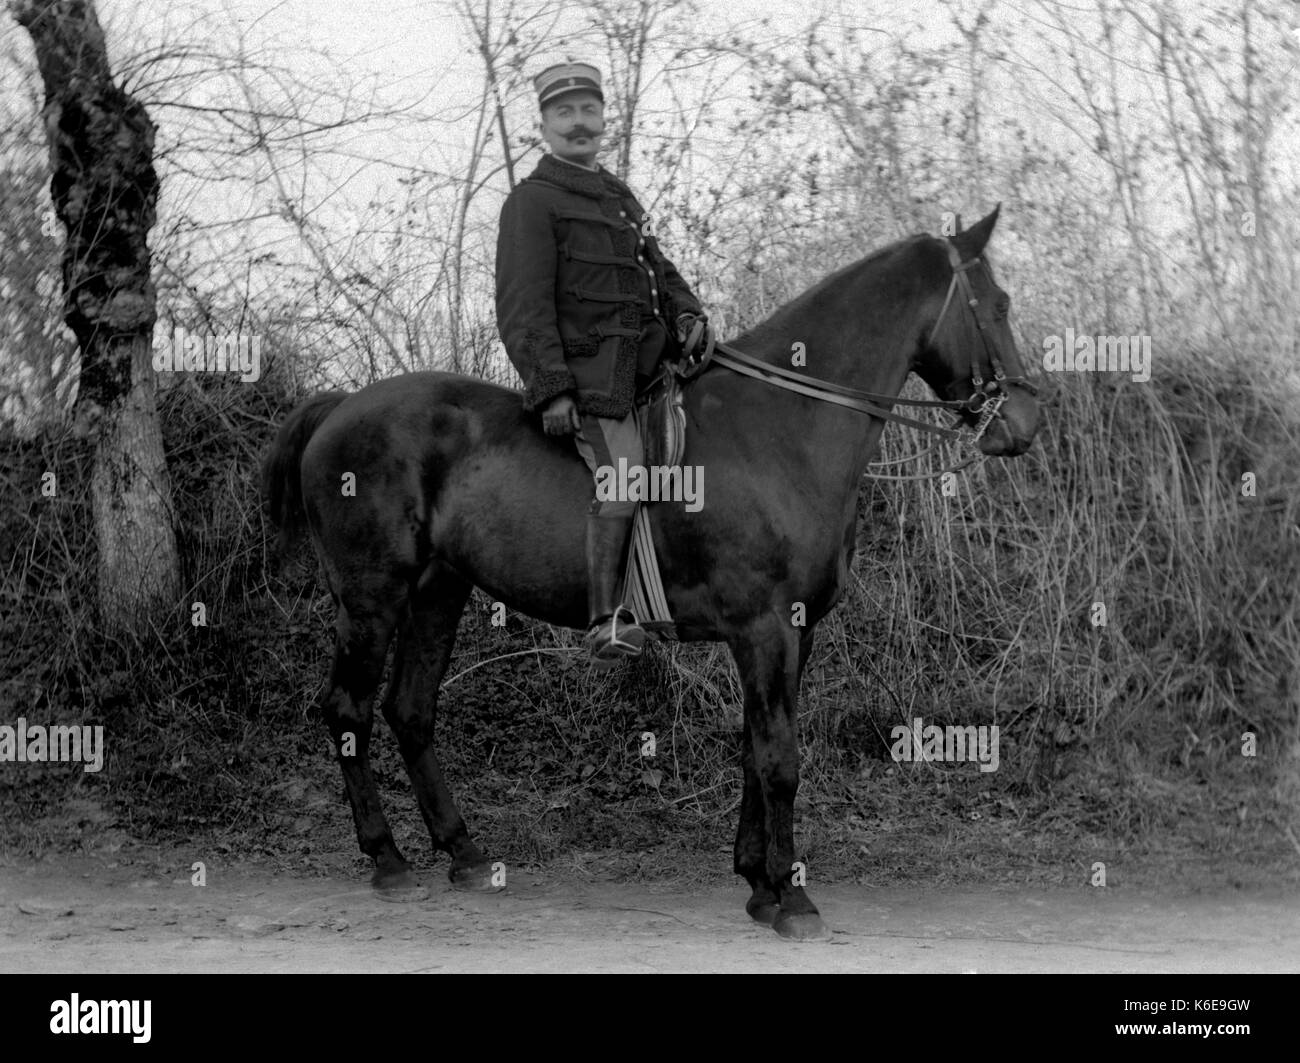 AJAXNETPHOTO. 1891-1910 (APPROX). SAINT-LO REGION, NORMANDY.FRANCE. - MAN IN FRENCH ARMY UNIFORM DATING FROM FRANCO PRUSSIAN WAR ON HORSEBACK. PHOTOGRAPHER:UNKNOWN © DIGITAL IMAGE COPYRIGHT AJAX VINTAGE PICTURE LIBRARY SOURCE: AJAX VINTAGE PICTURE LIBRARY COLLECTION REF:AVL FRA 1890 B29X1220 Stock Photo